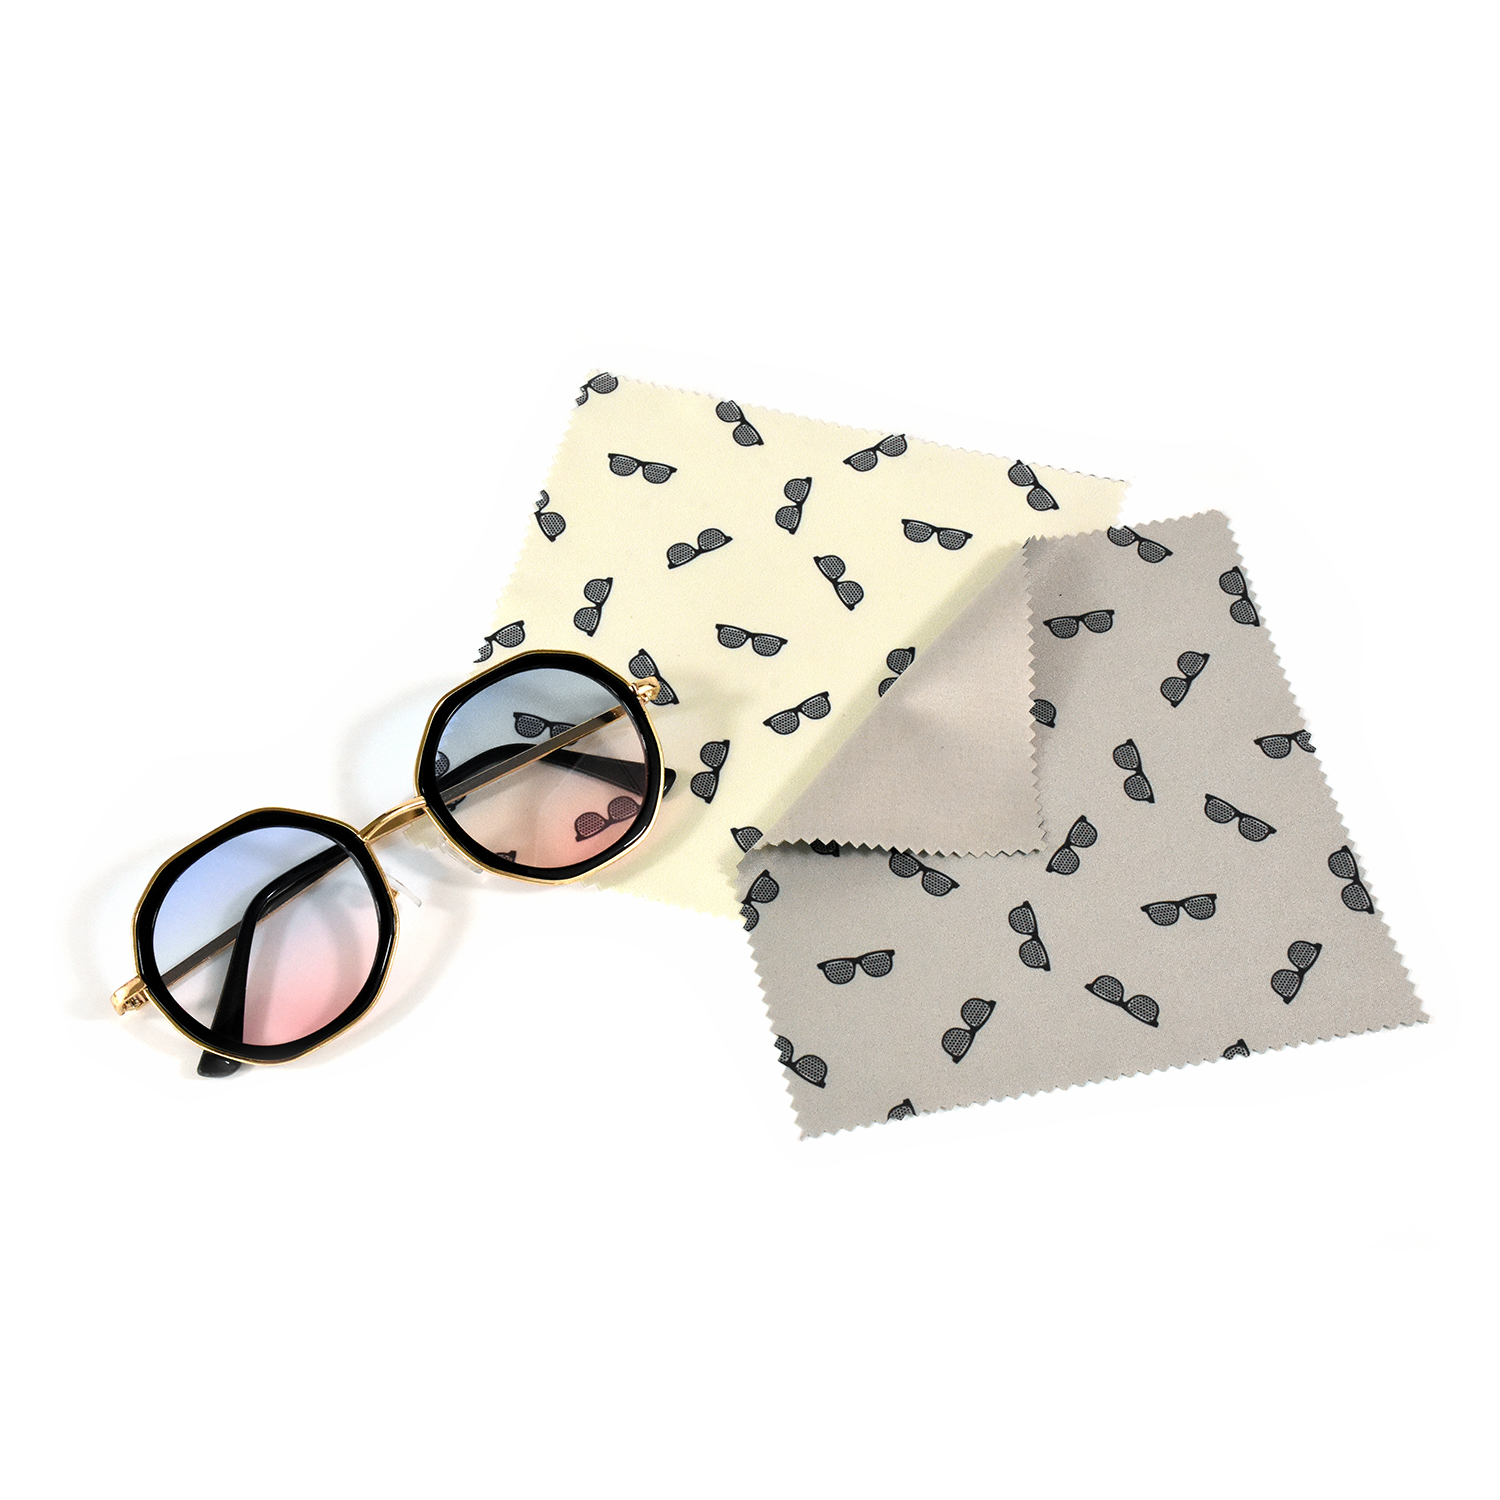 Small glasses circular pattern Microfiber Glasses cloth Lenses Cleaning Cloth full scale printing Spectacle Glasses Cloth